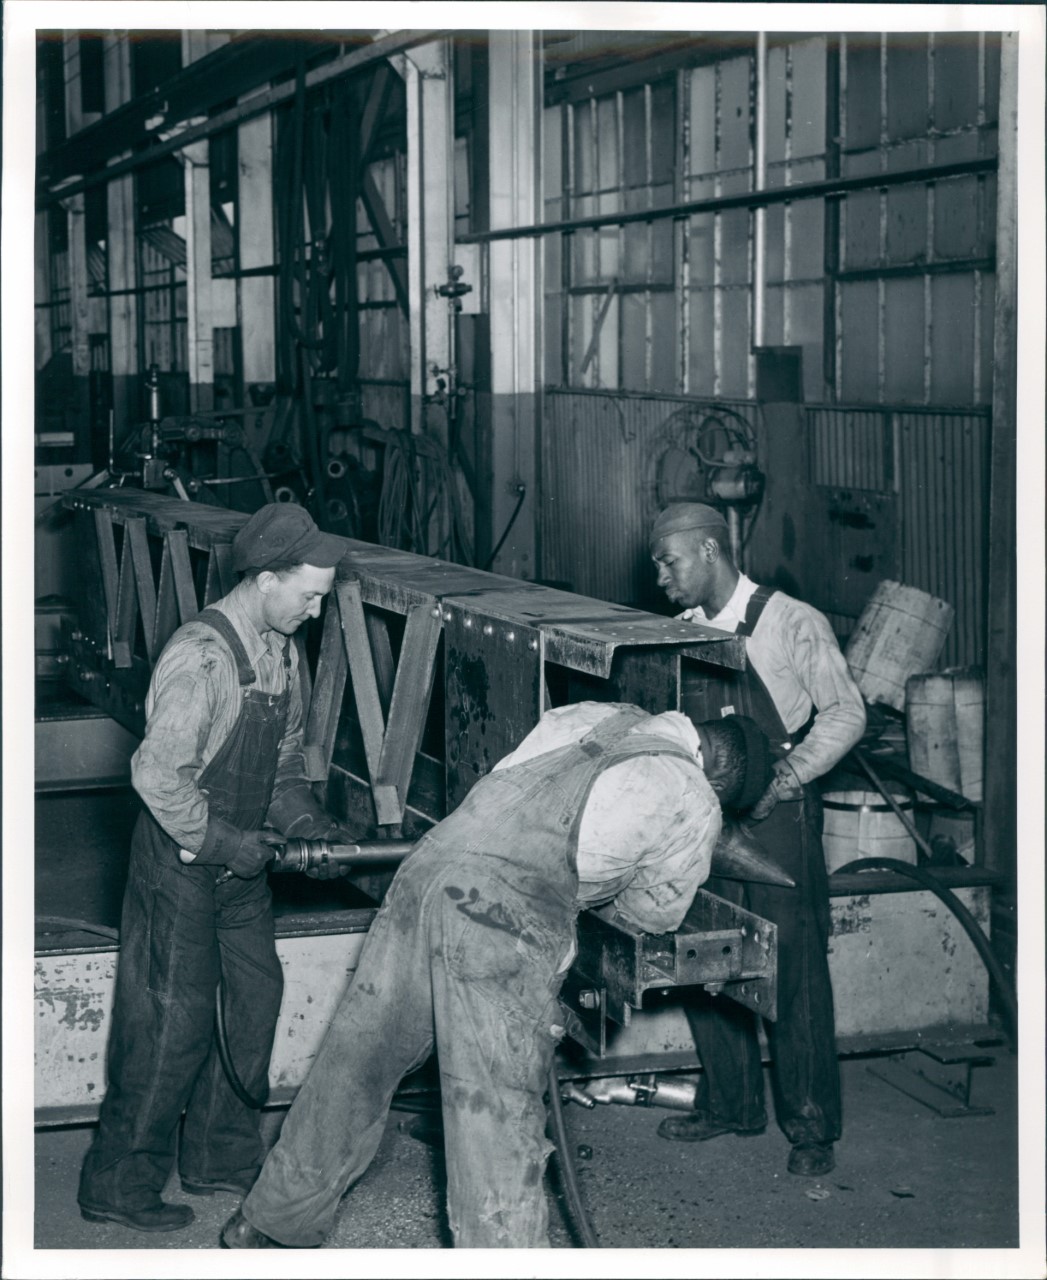 O'Neal Industries has employed Birminghamians for 100 years. Photo courtesy of O'Neal Industries